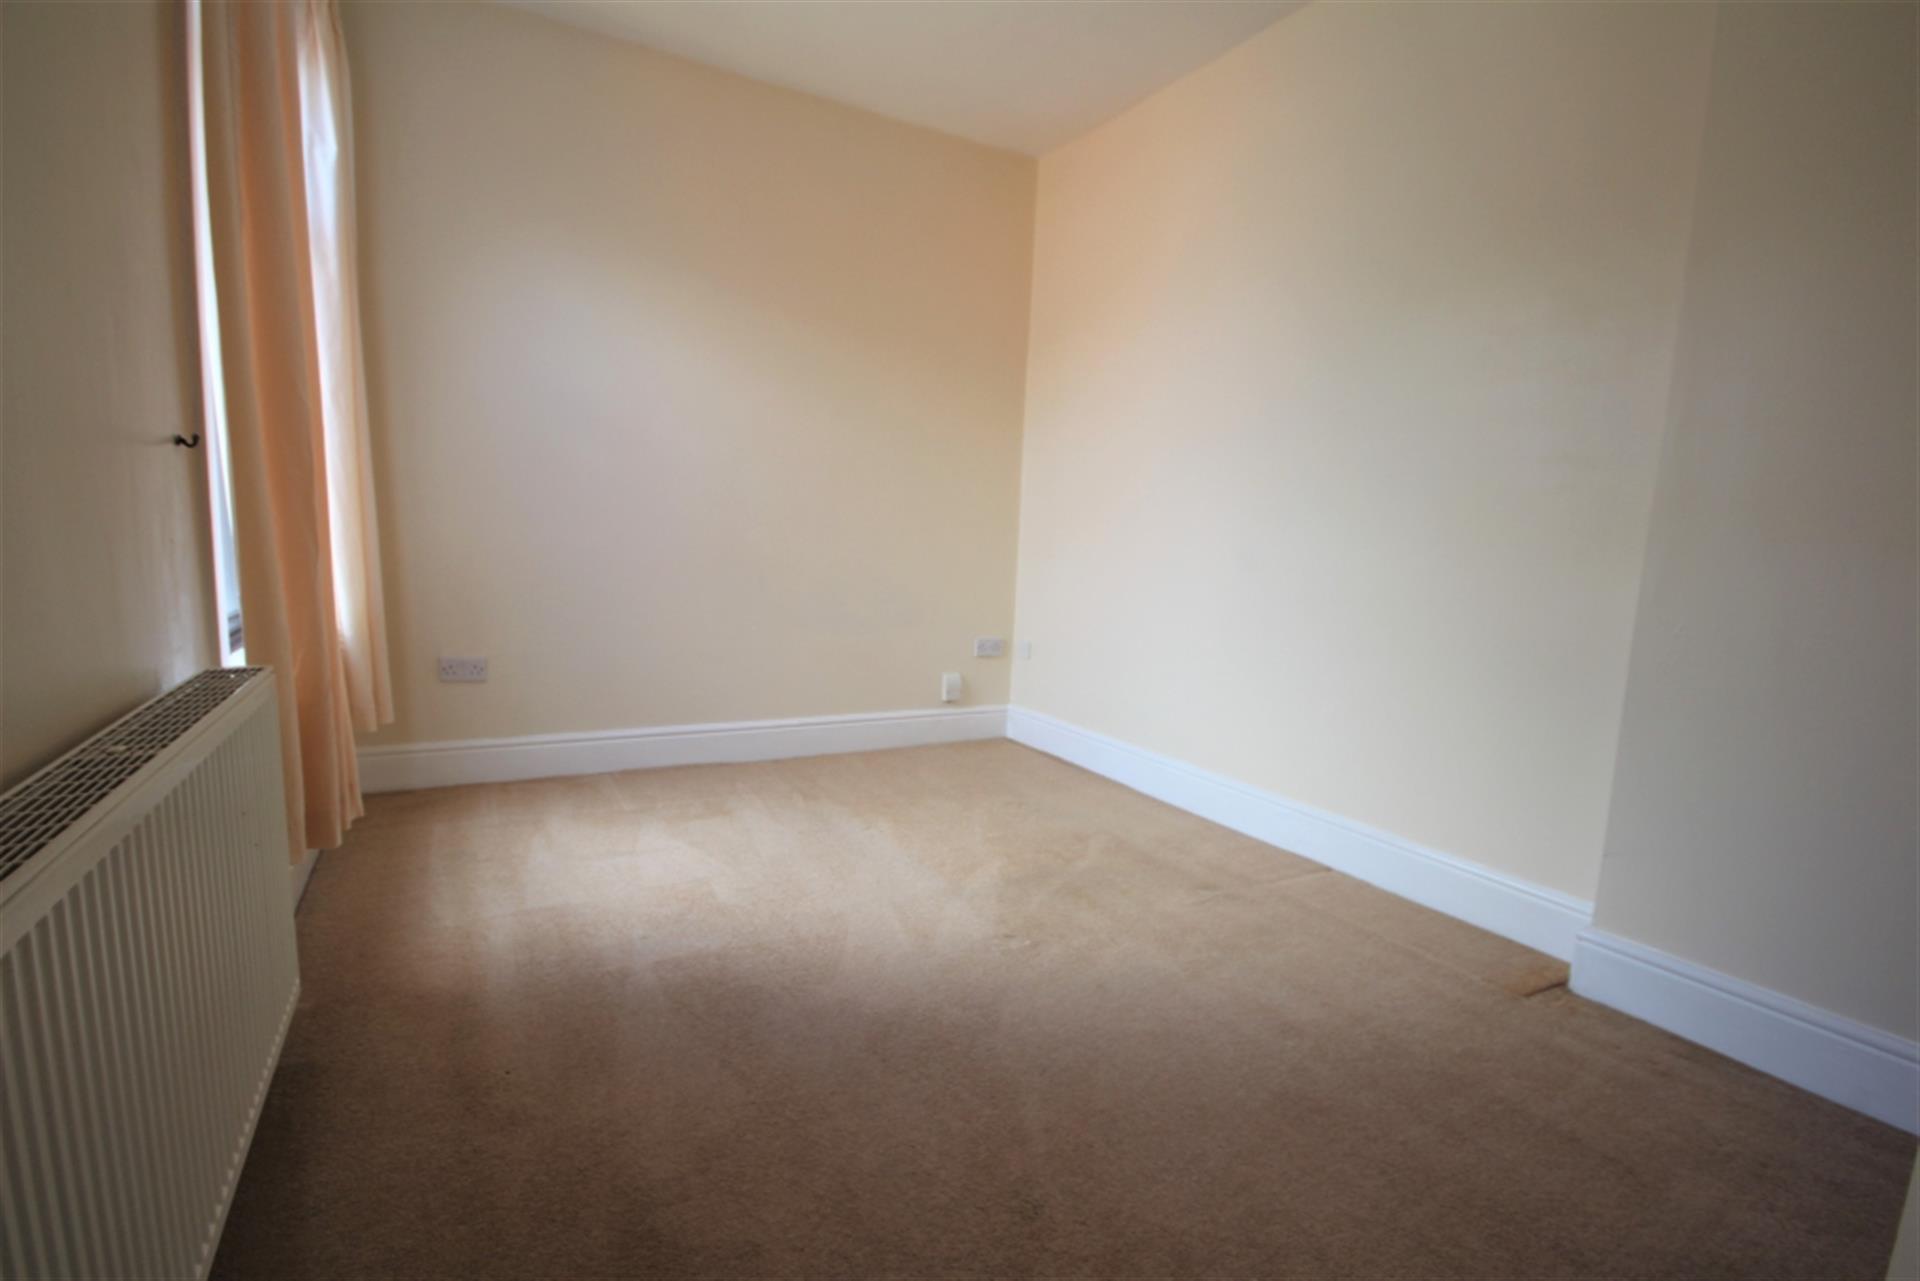 1 bedroom house share house / flat share To Let in Smithills, Bolton, Lancs - Bedroom